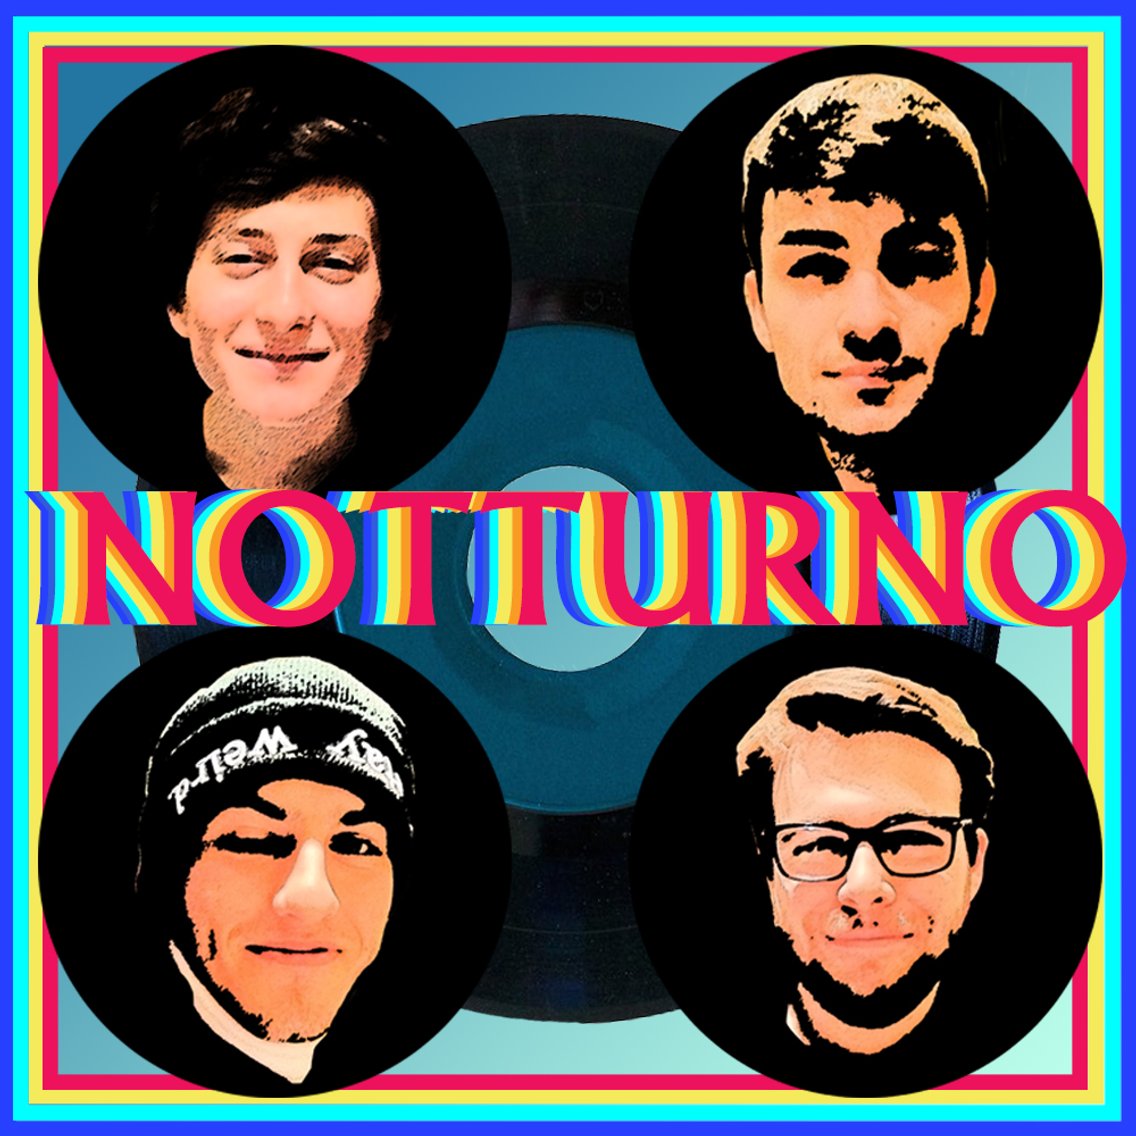 Notturno - Cover Image